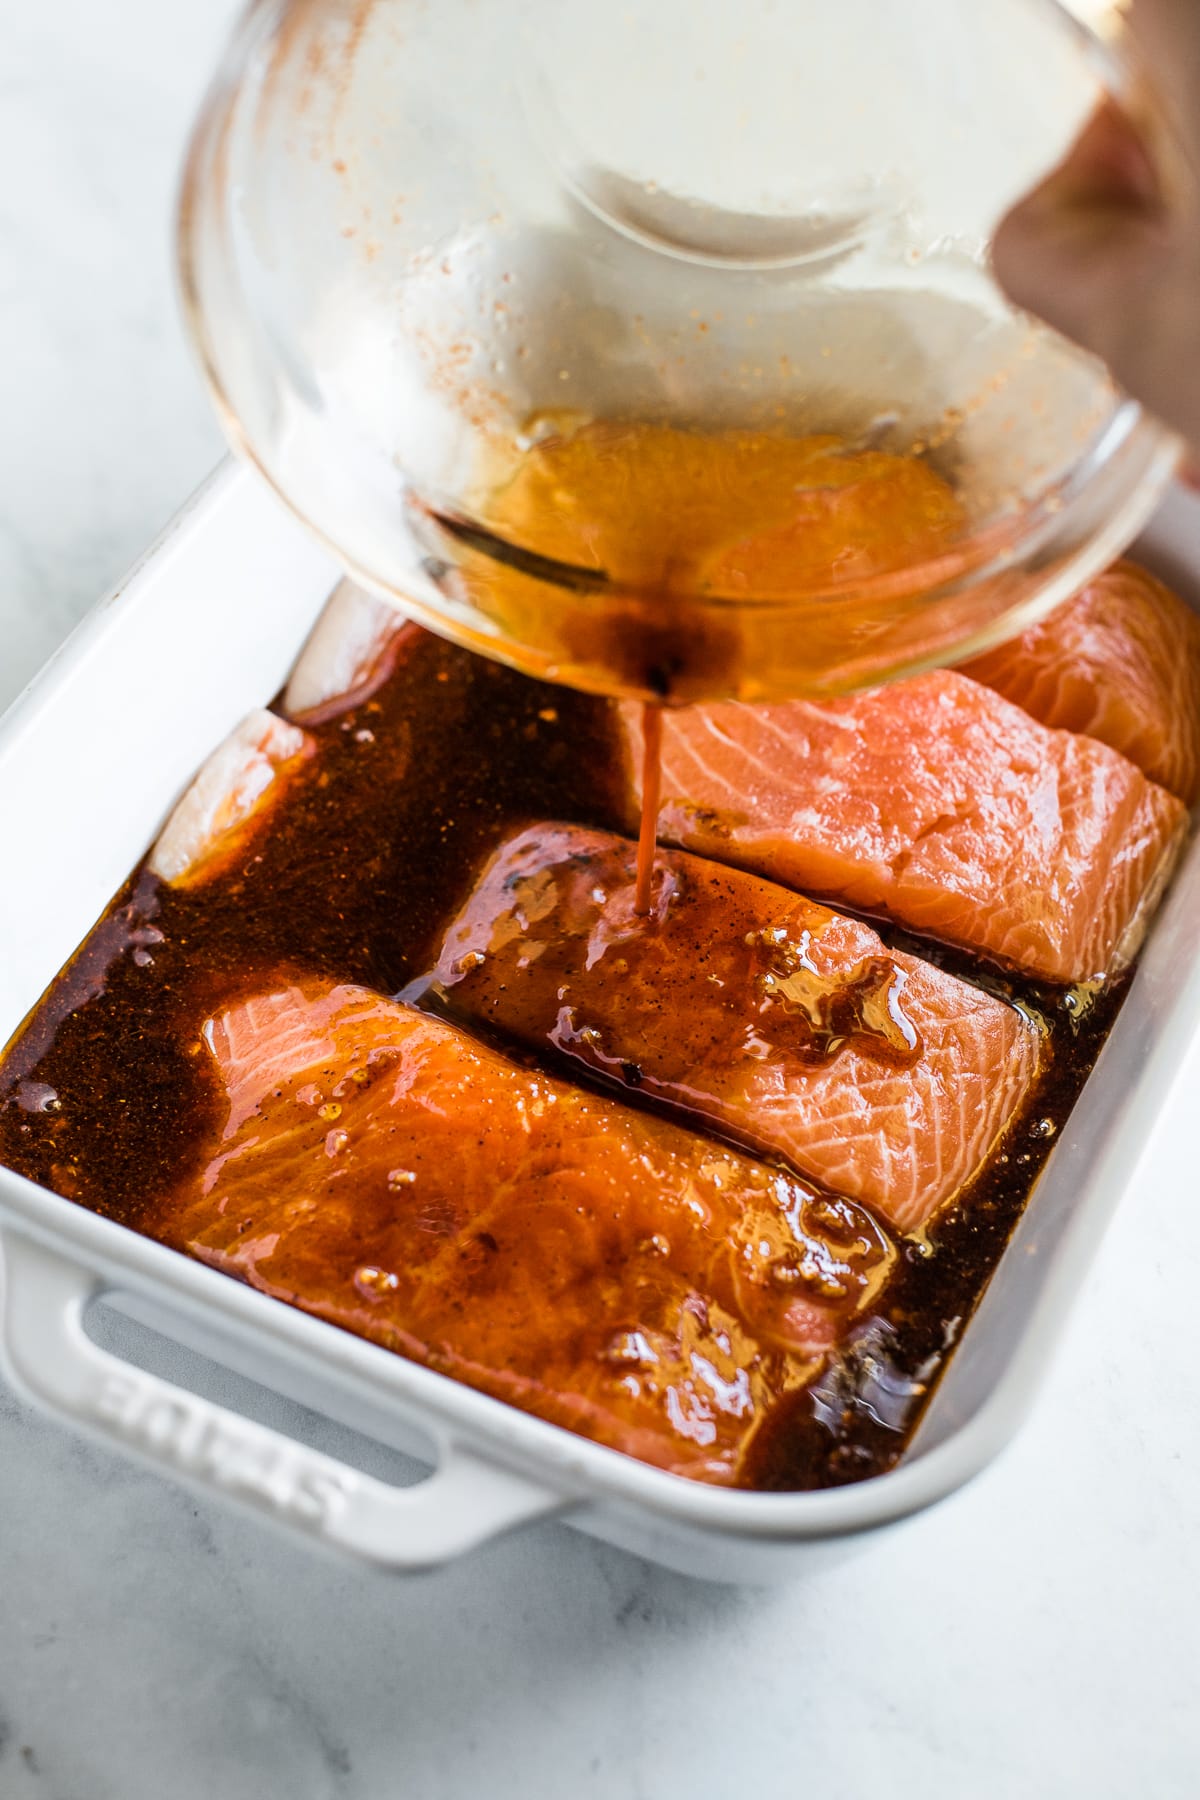 Chili garlic marinade being poured on salmon filets.